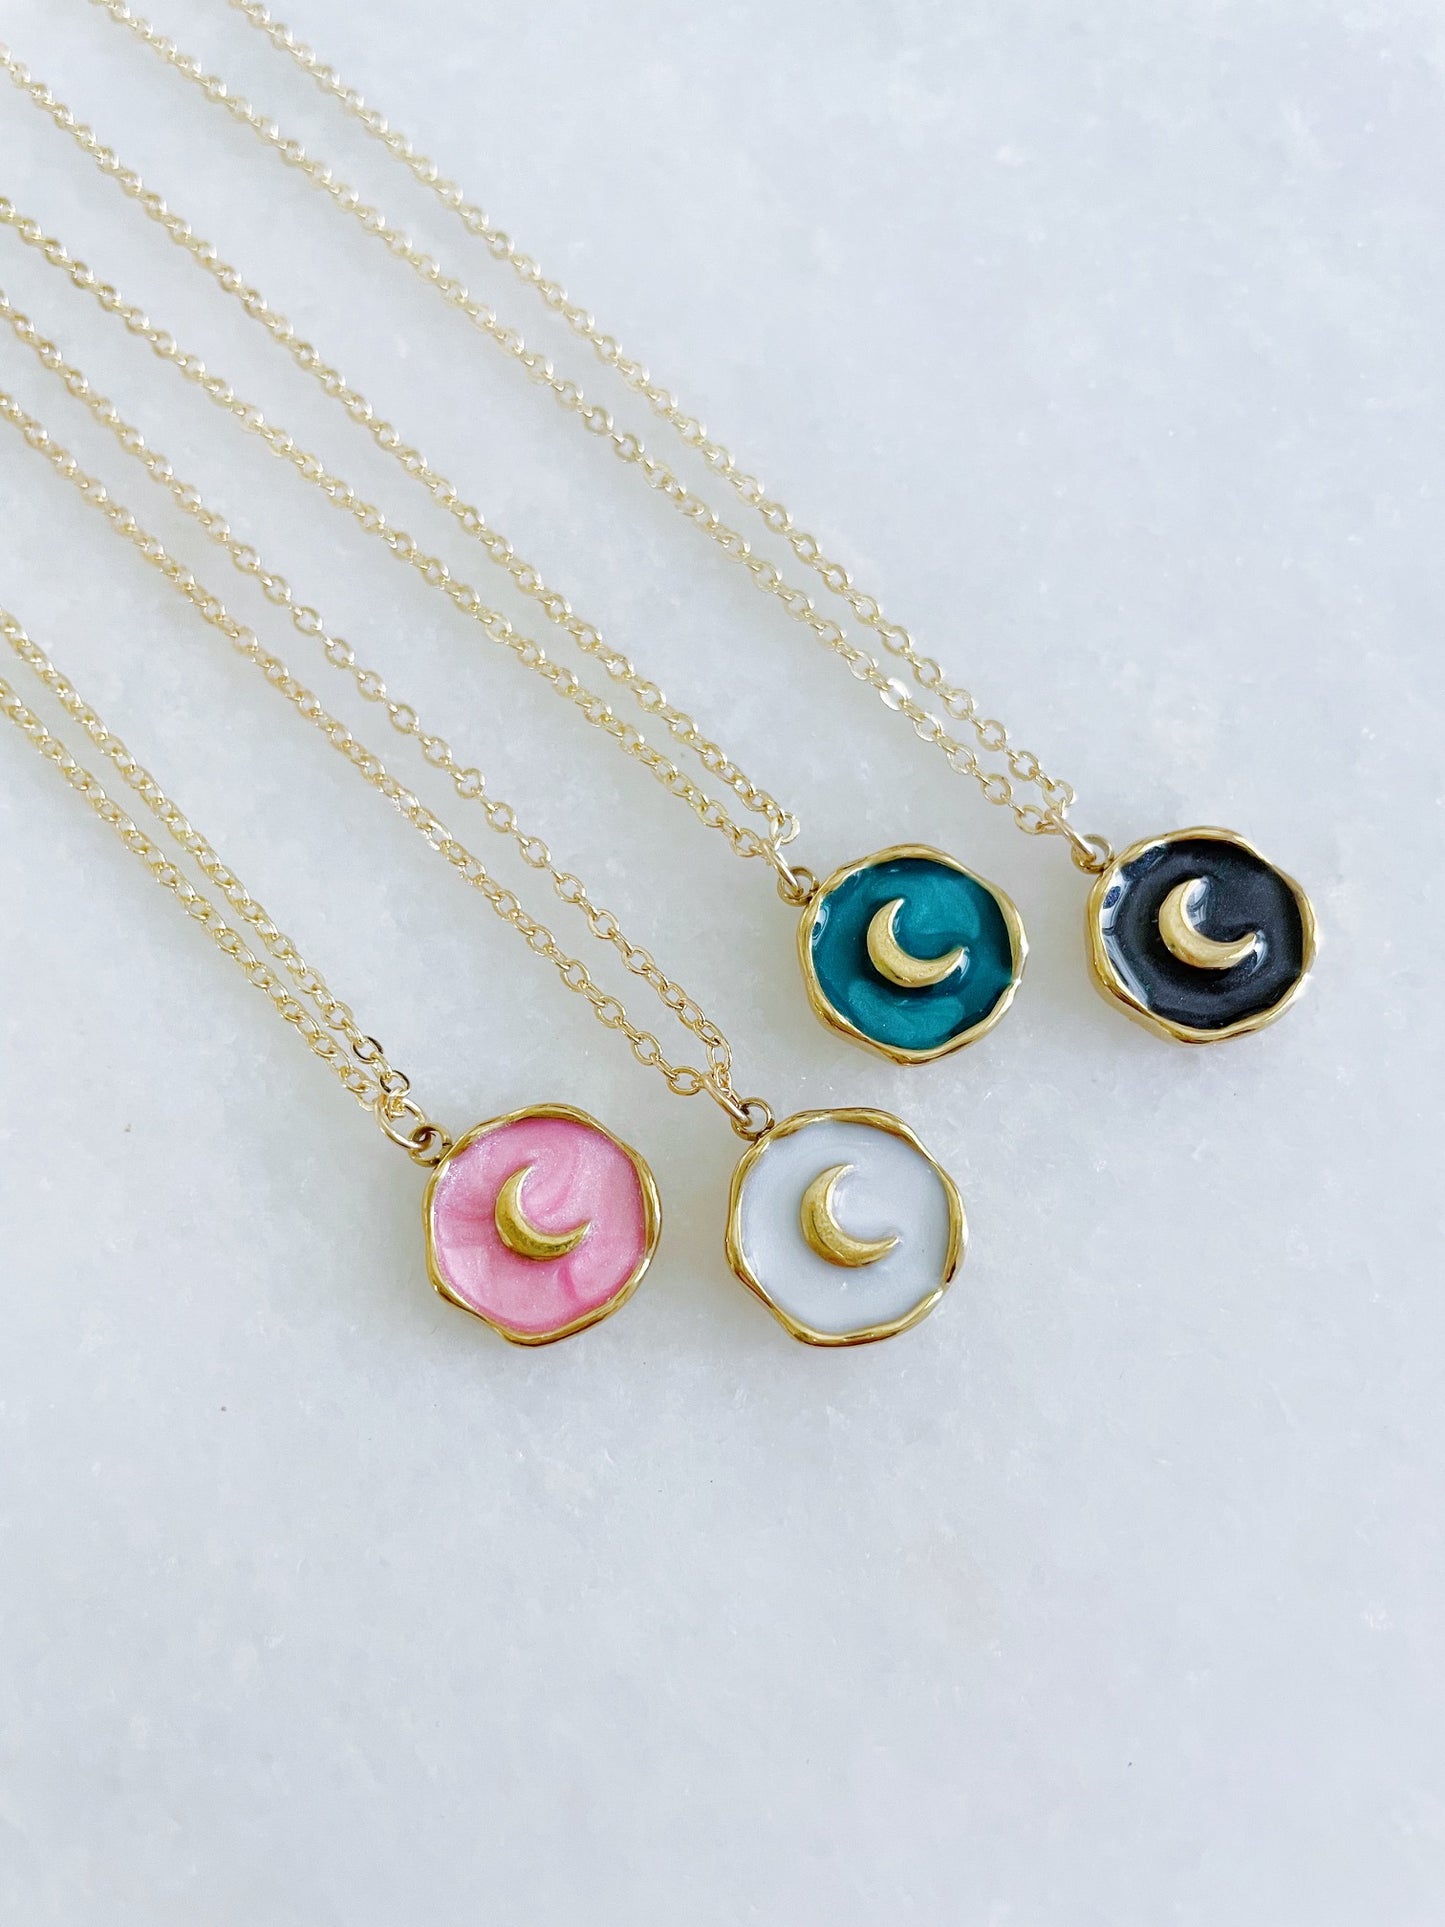 Gold Moon Necklace, Moon Jewelry, Crescent Moon Pendant